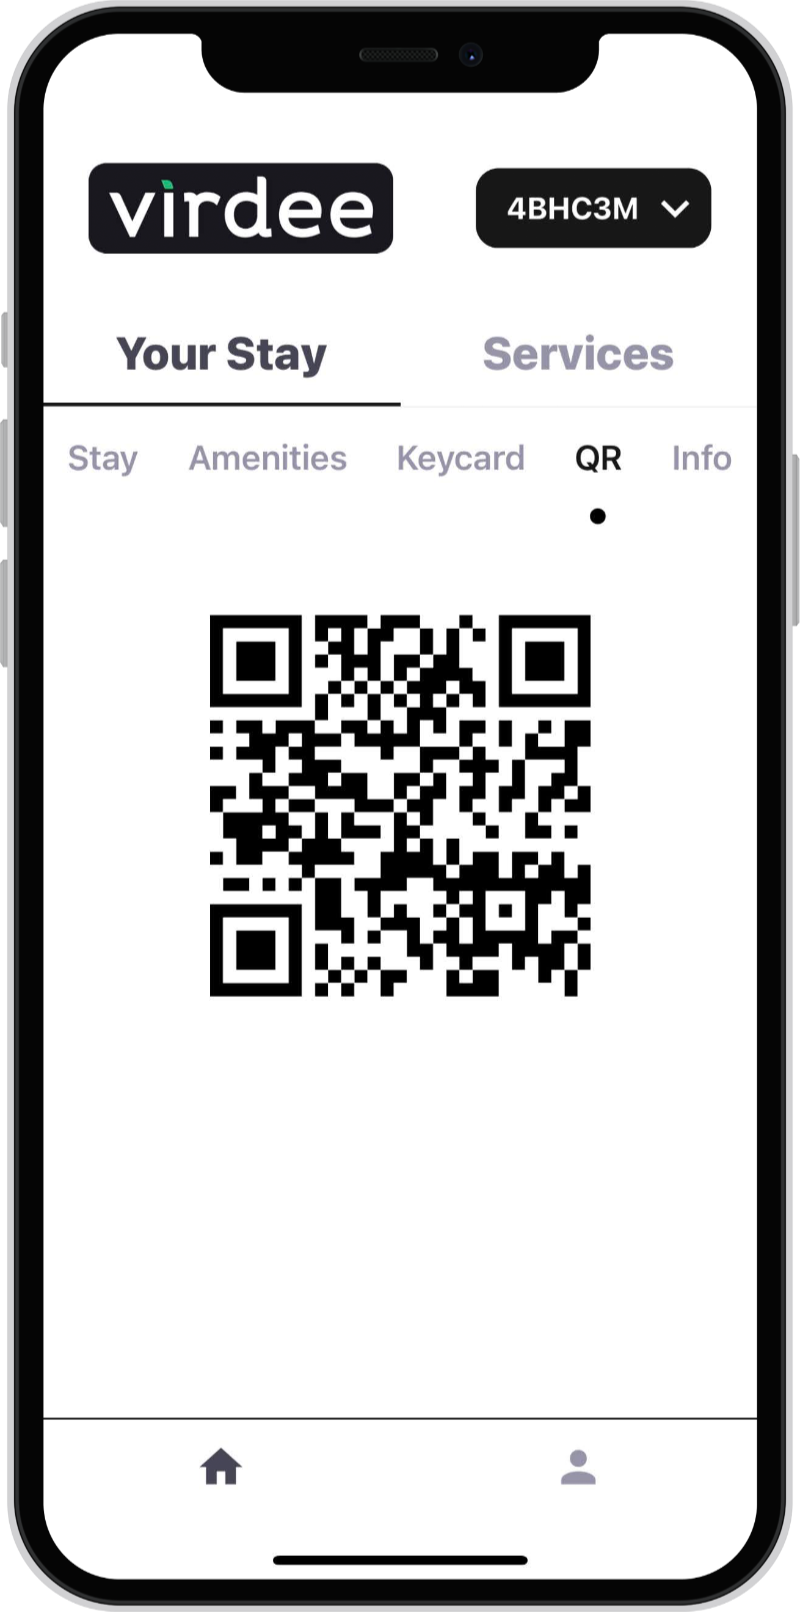 Virdee QR used at Check-in with the kiosk to continue the check-in process